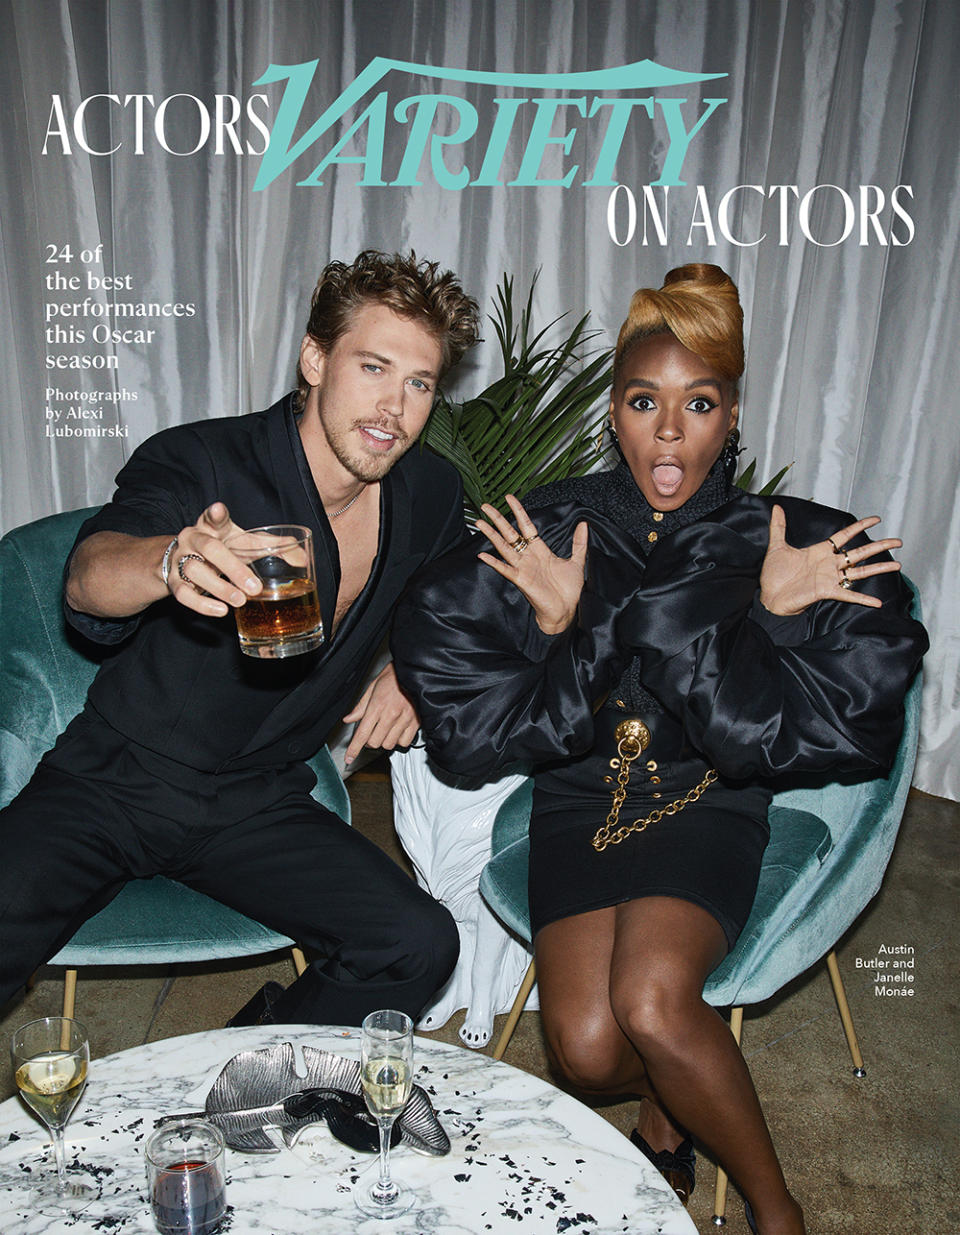 Janelle Monae and Austin Butler Variety Actors on Actors Cover 2022